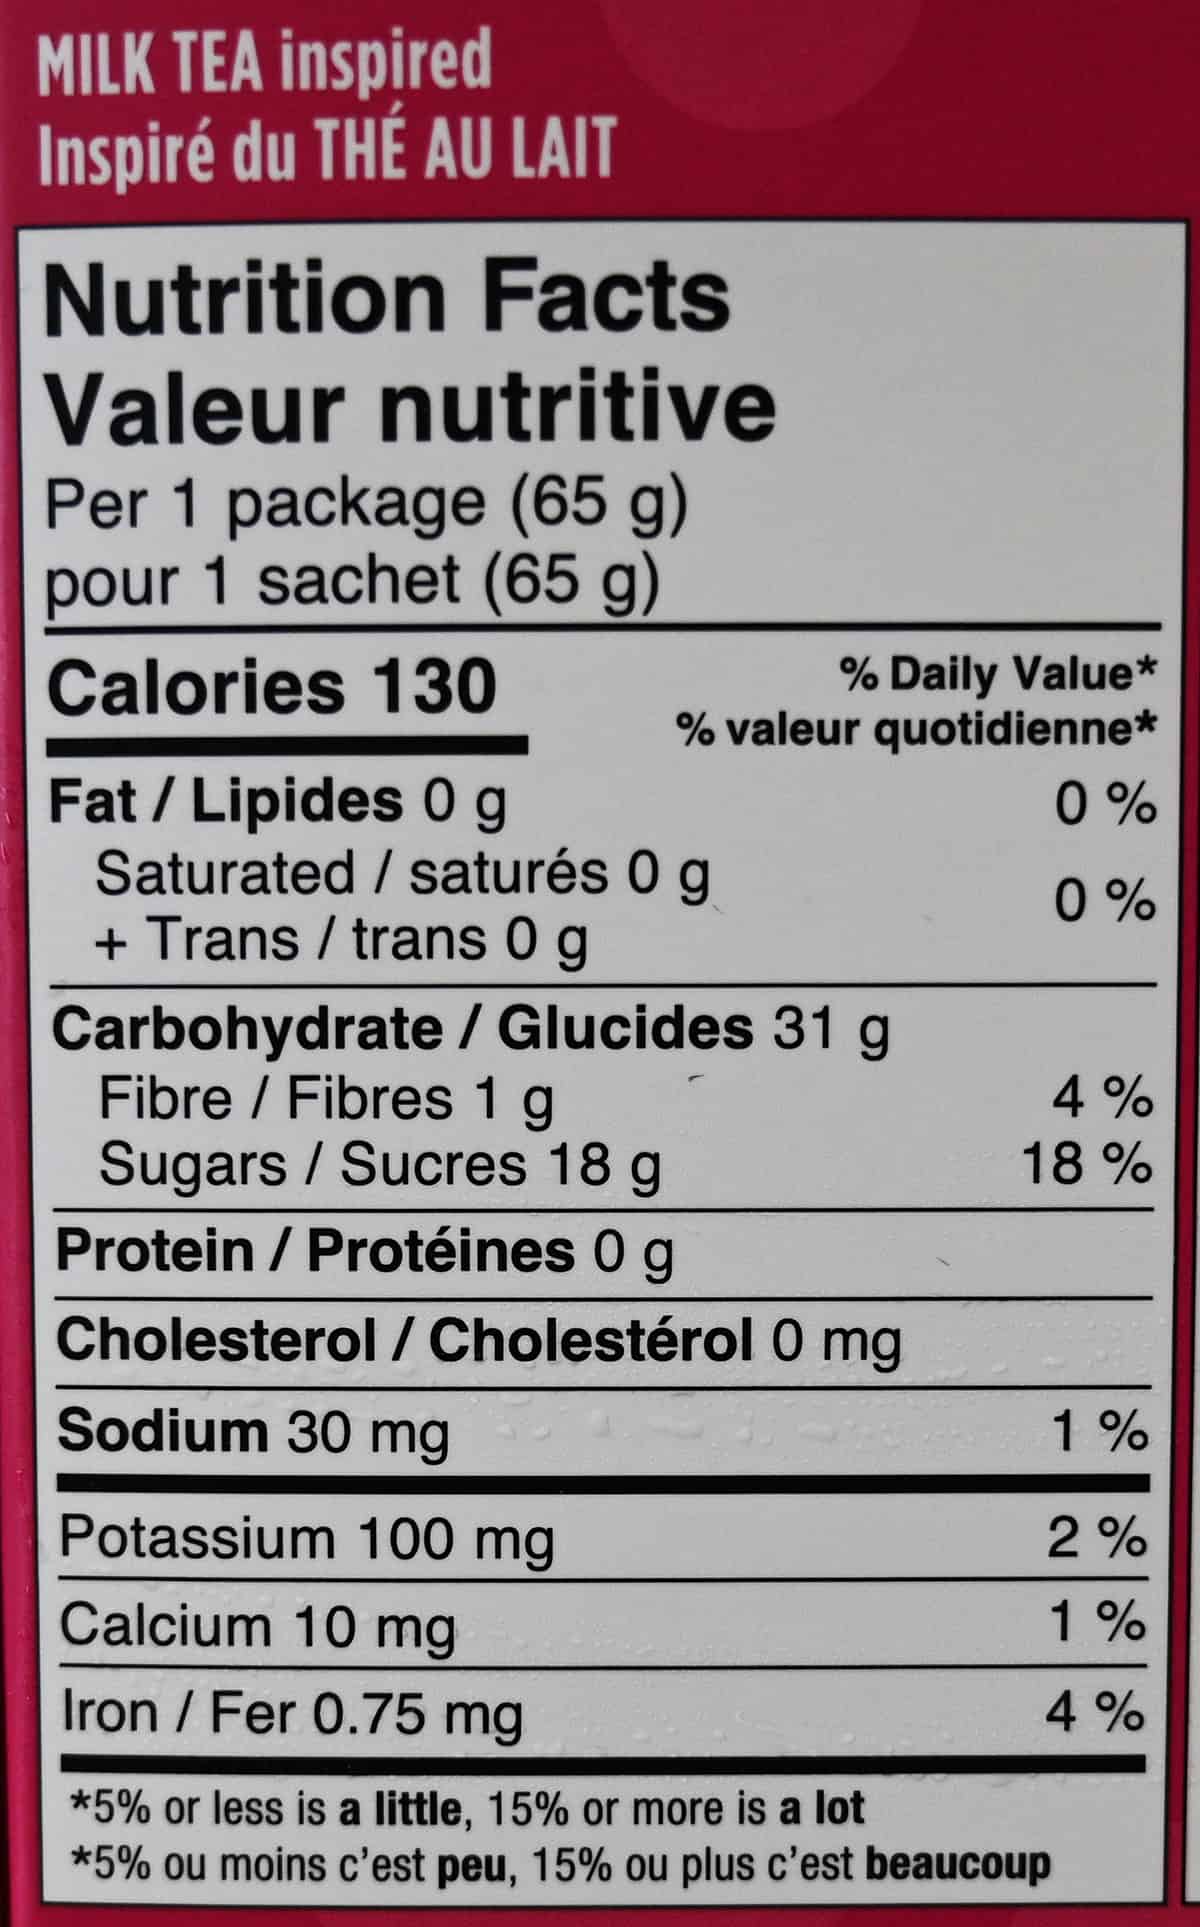 Image of the milk tea boba nutrition facts from the back of the box.